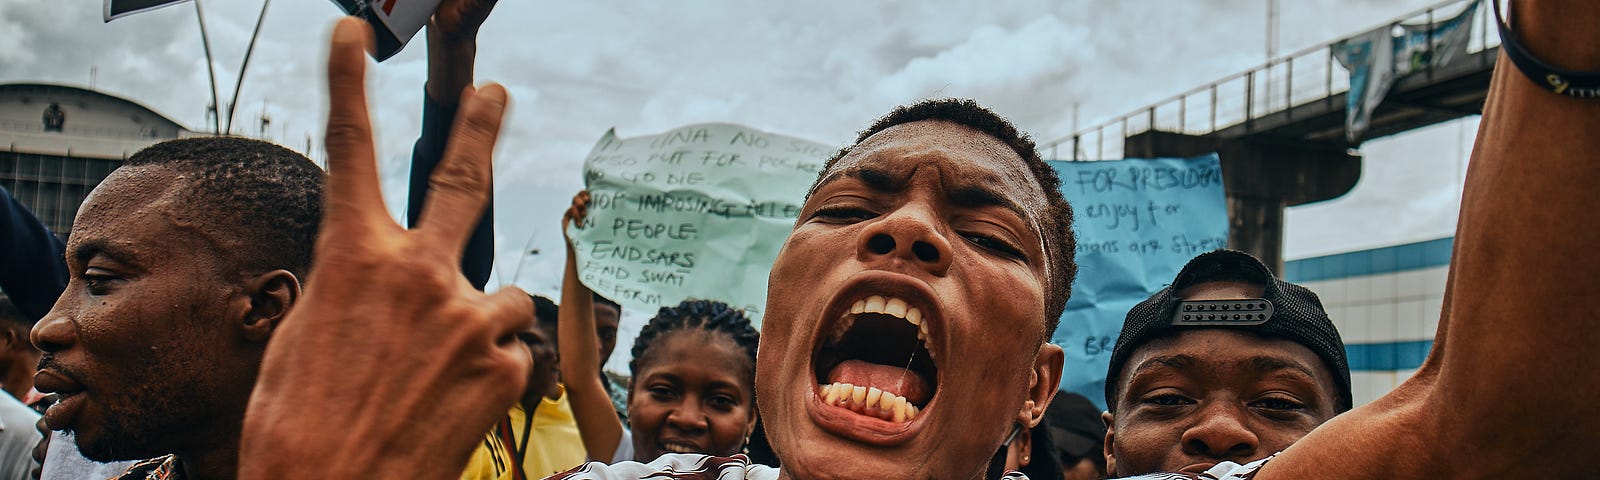 A young Nigerian shouting at the End Sars protest. The picture looks like one of the wrong thoughts about Nigerians.